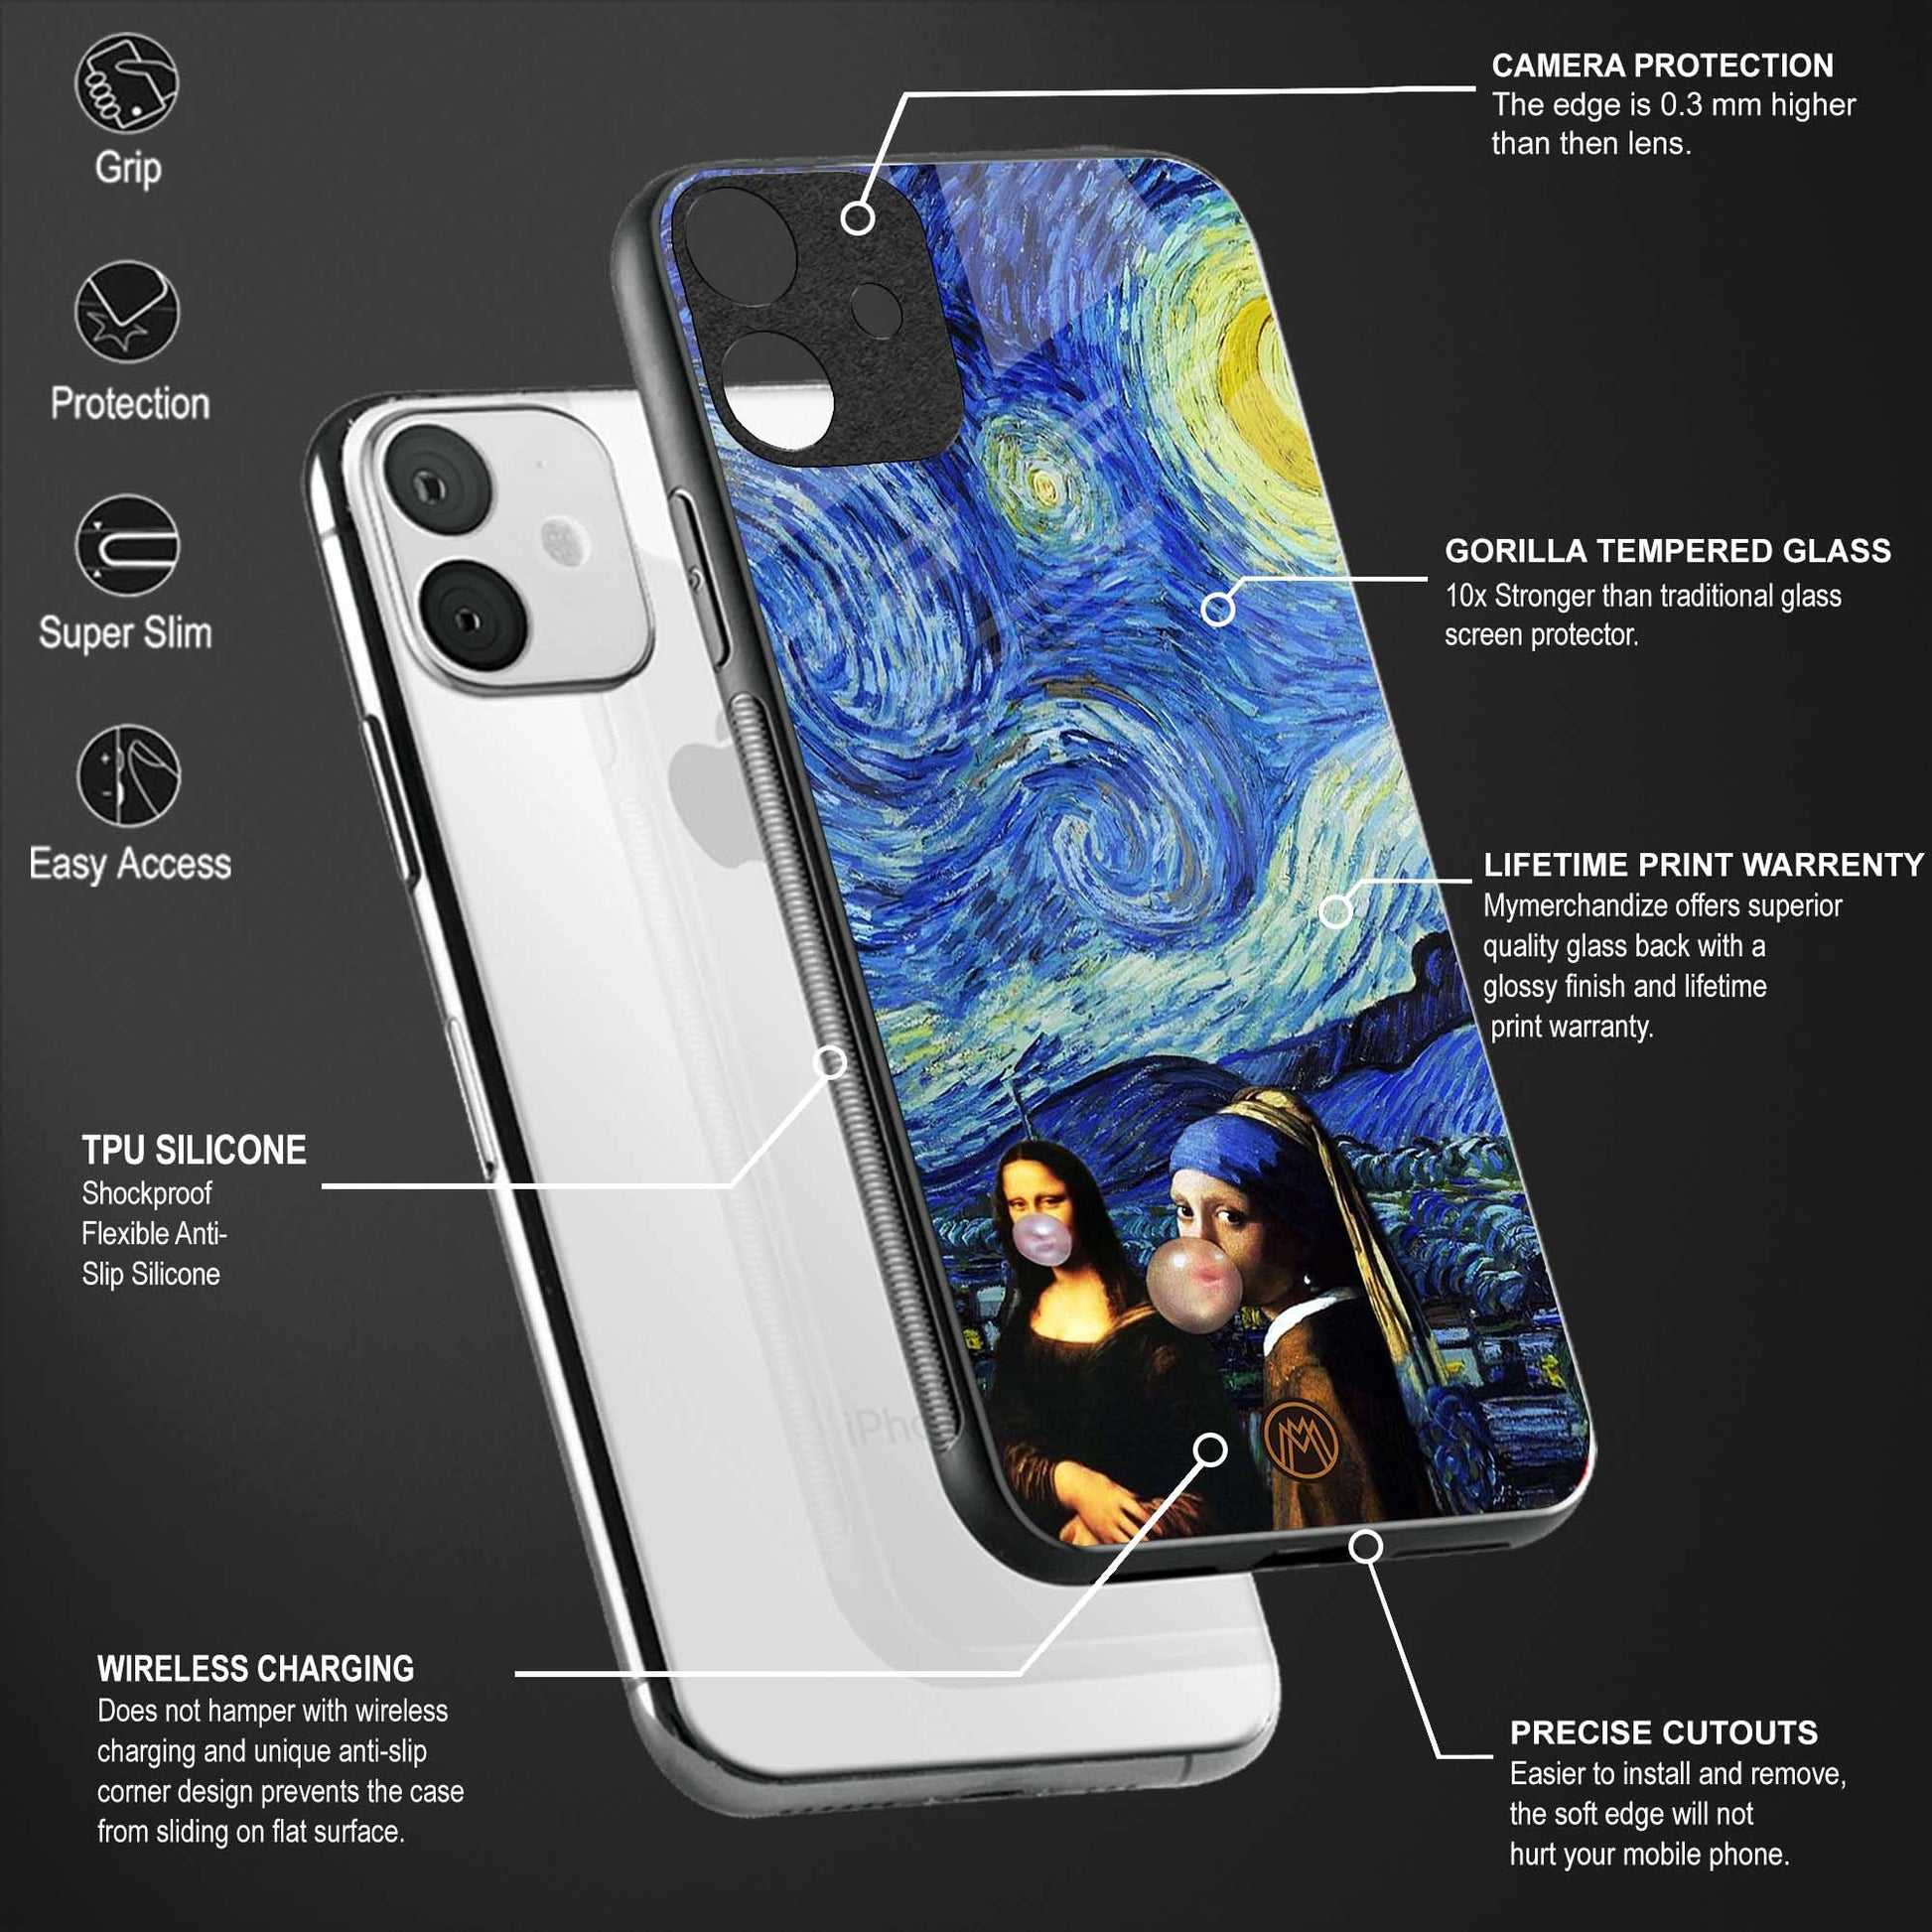 mona lisa starry night glass case for phone case | glass case for oneplus nord 2t 5g